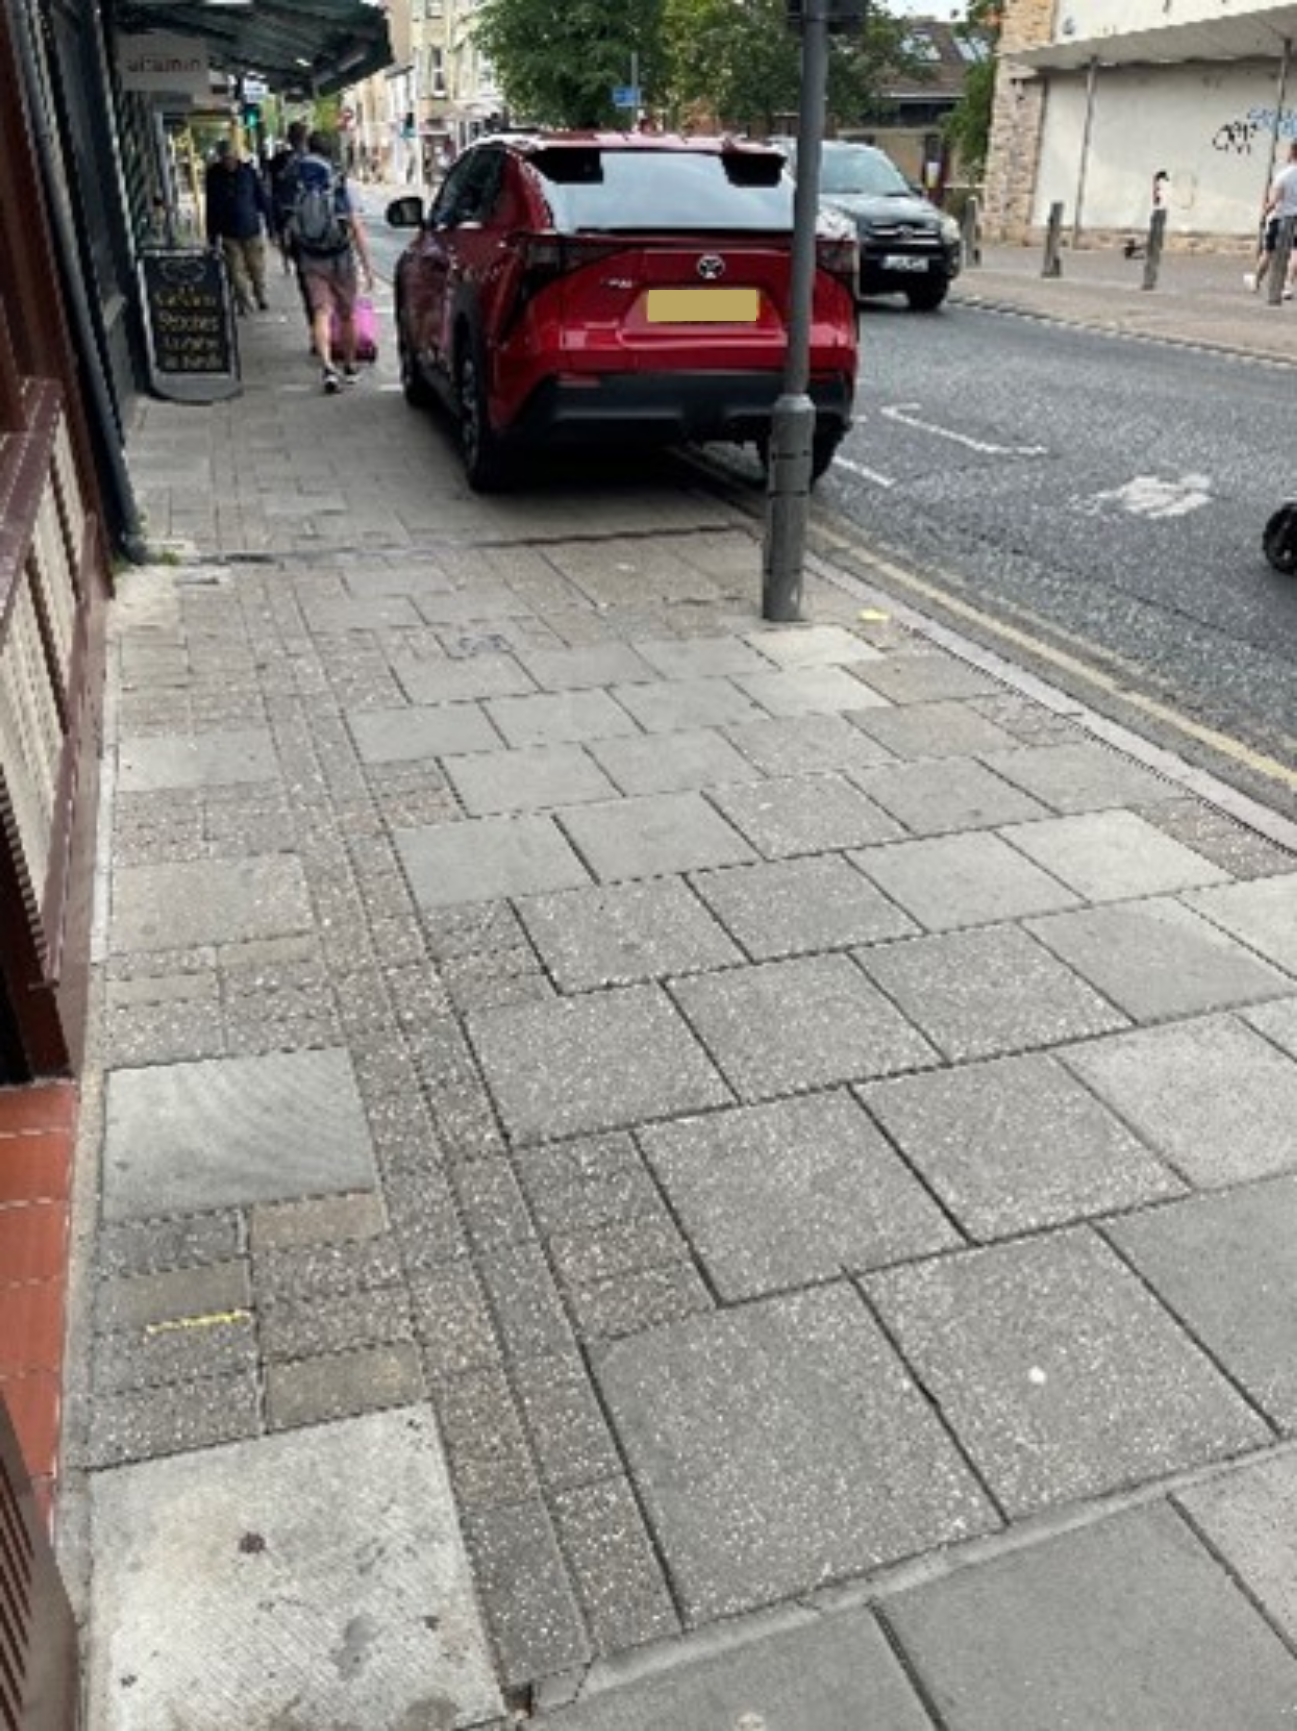 A parked car partially blocking a pavement